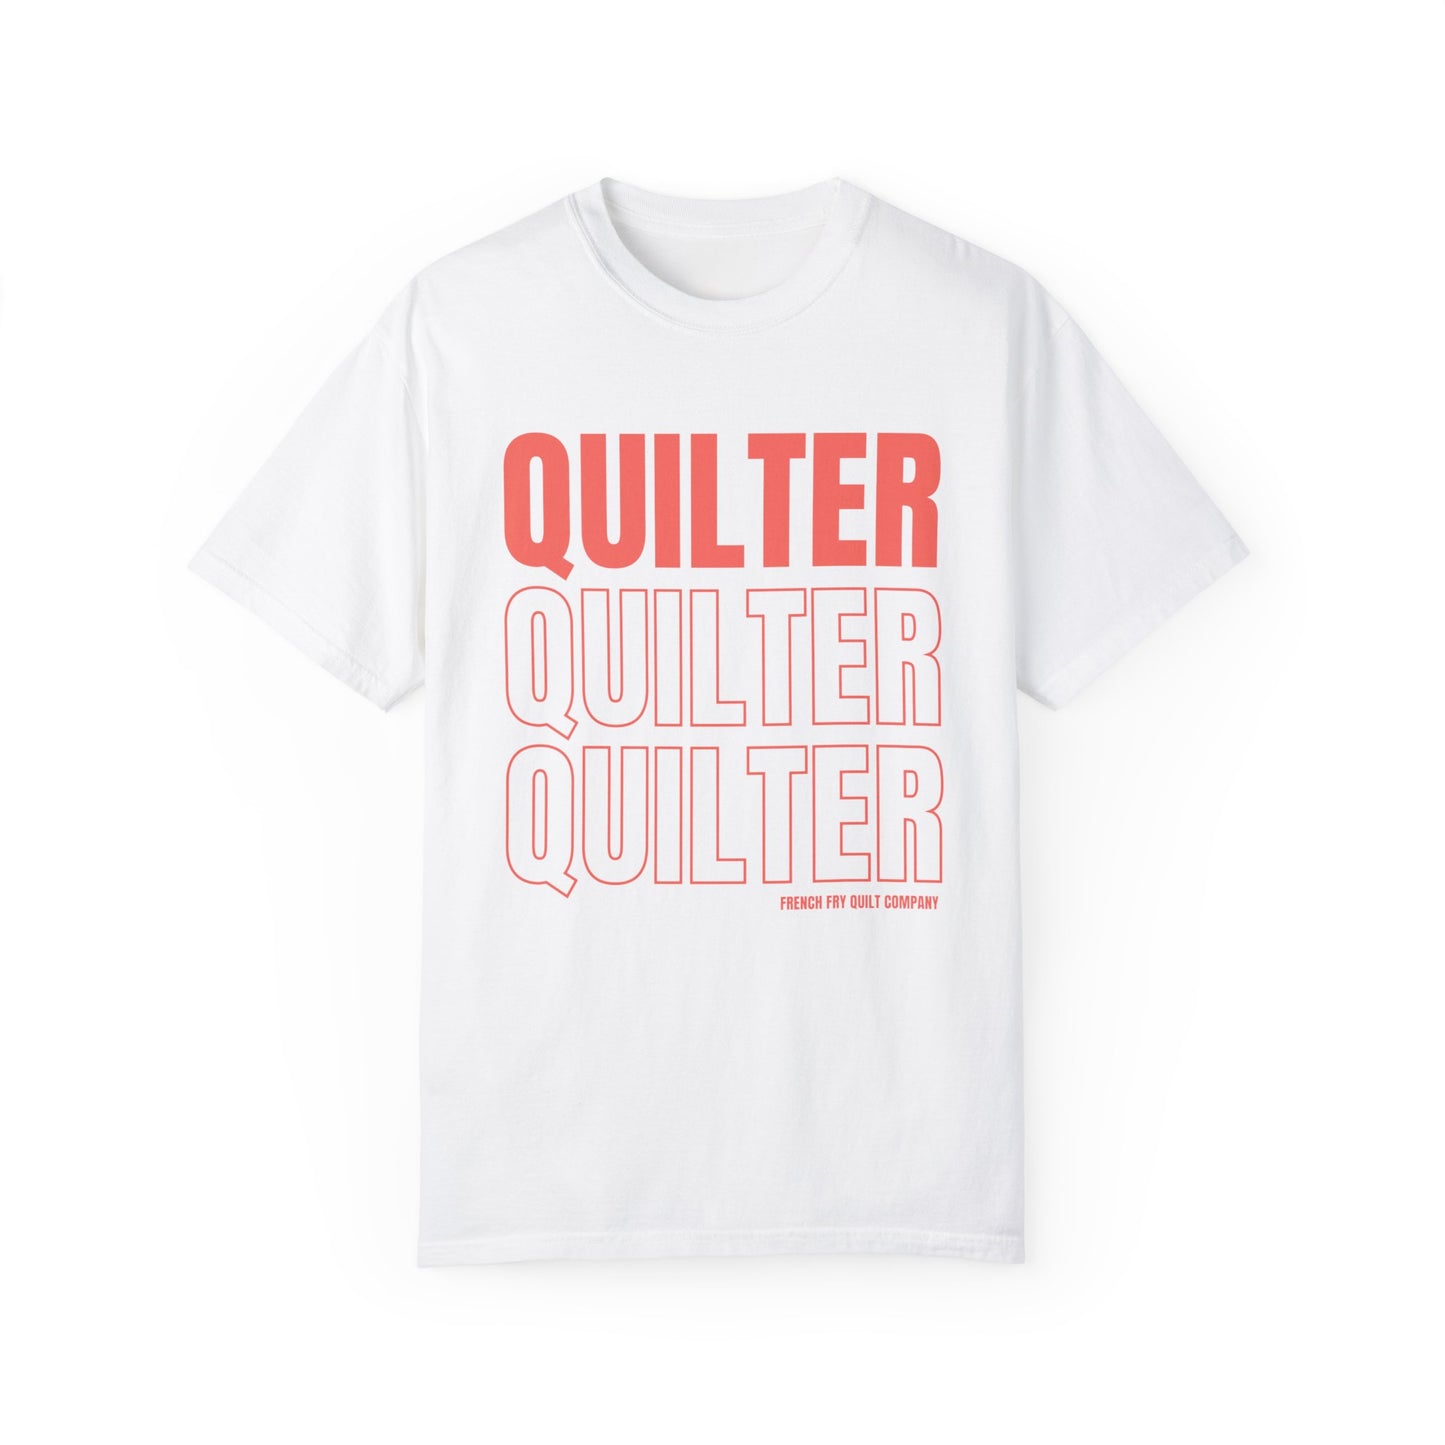 "Quilter" Soft-Washed T-shirt